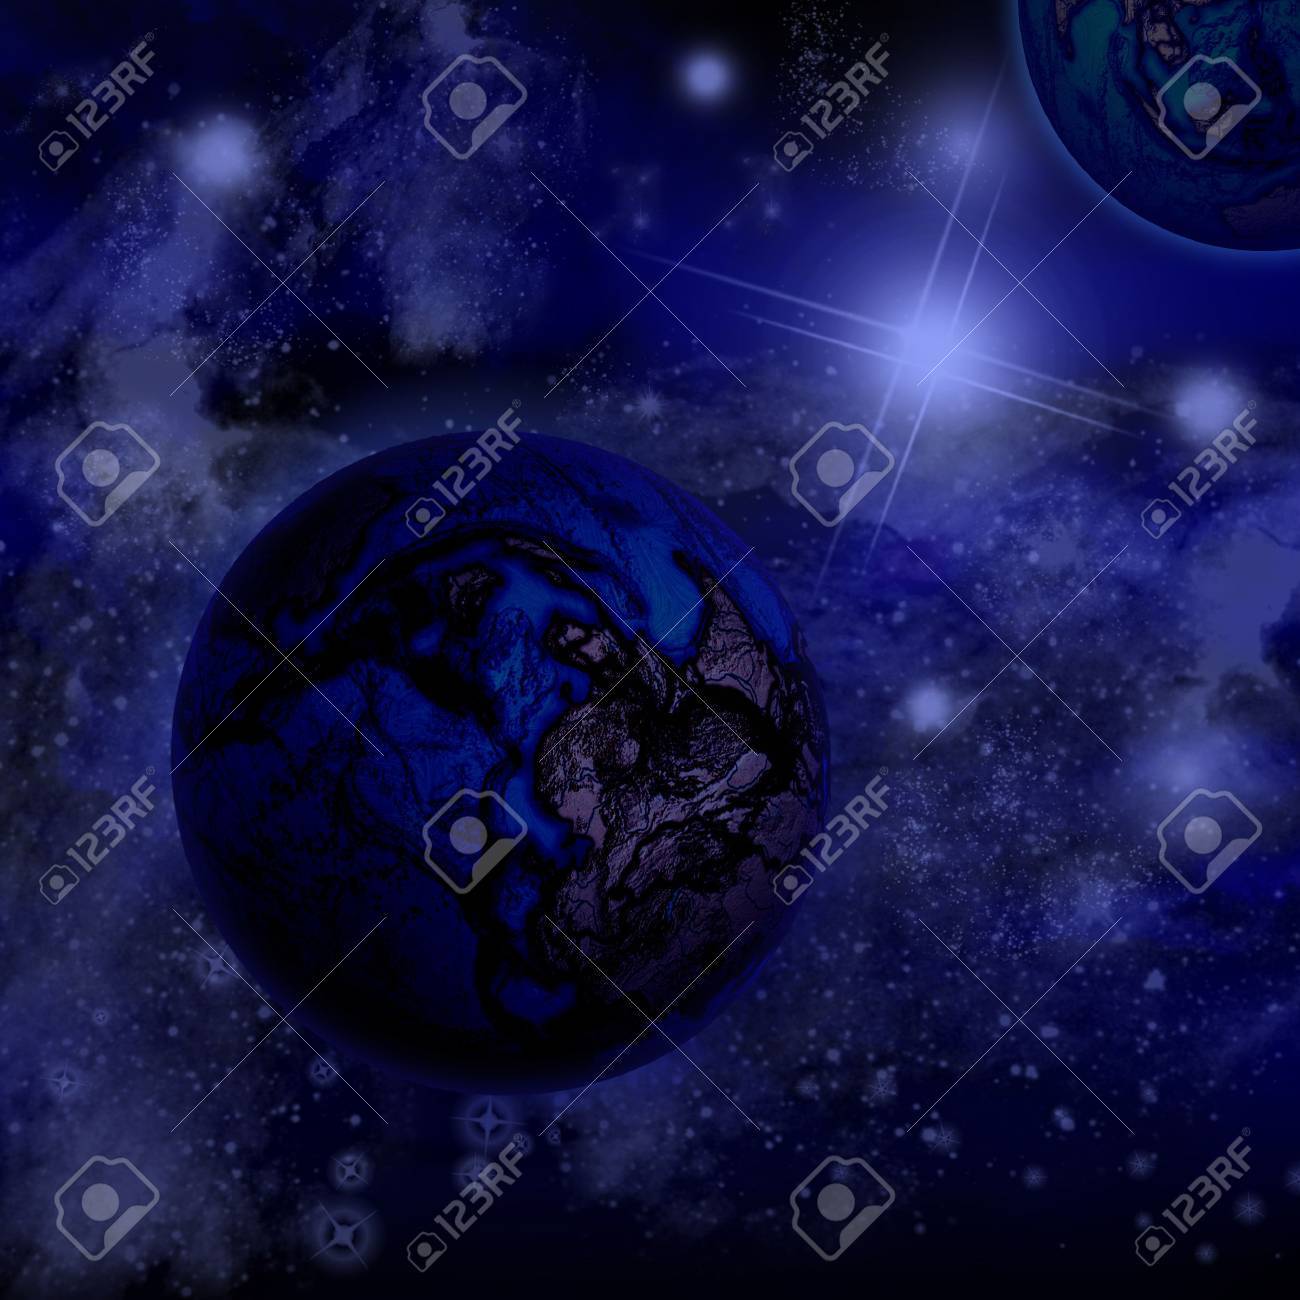 Star Galactic Background Stock Photo Picture And Royalty